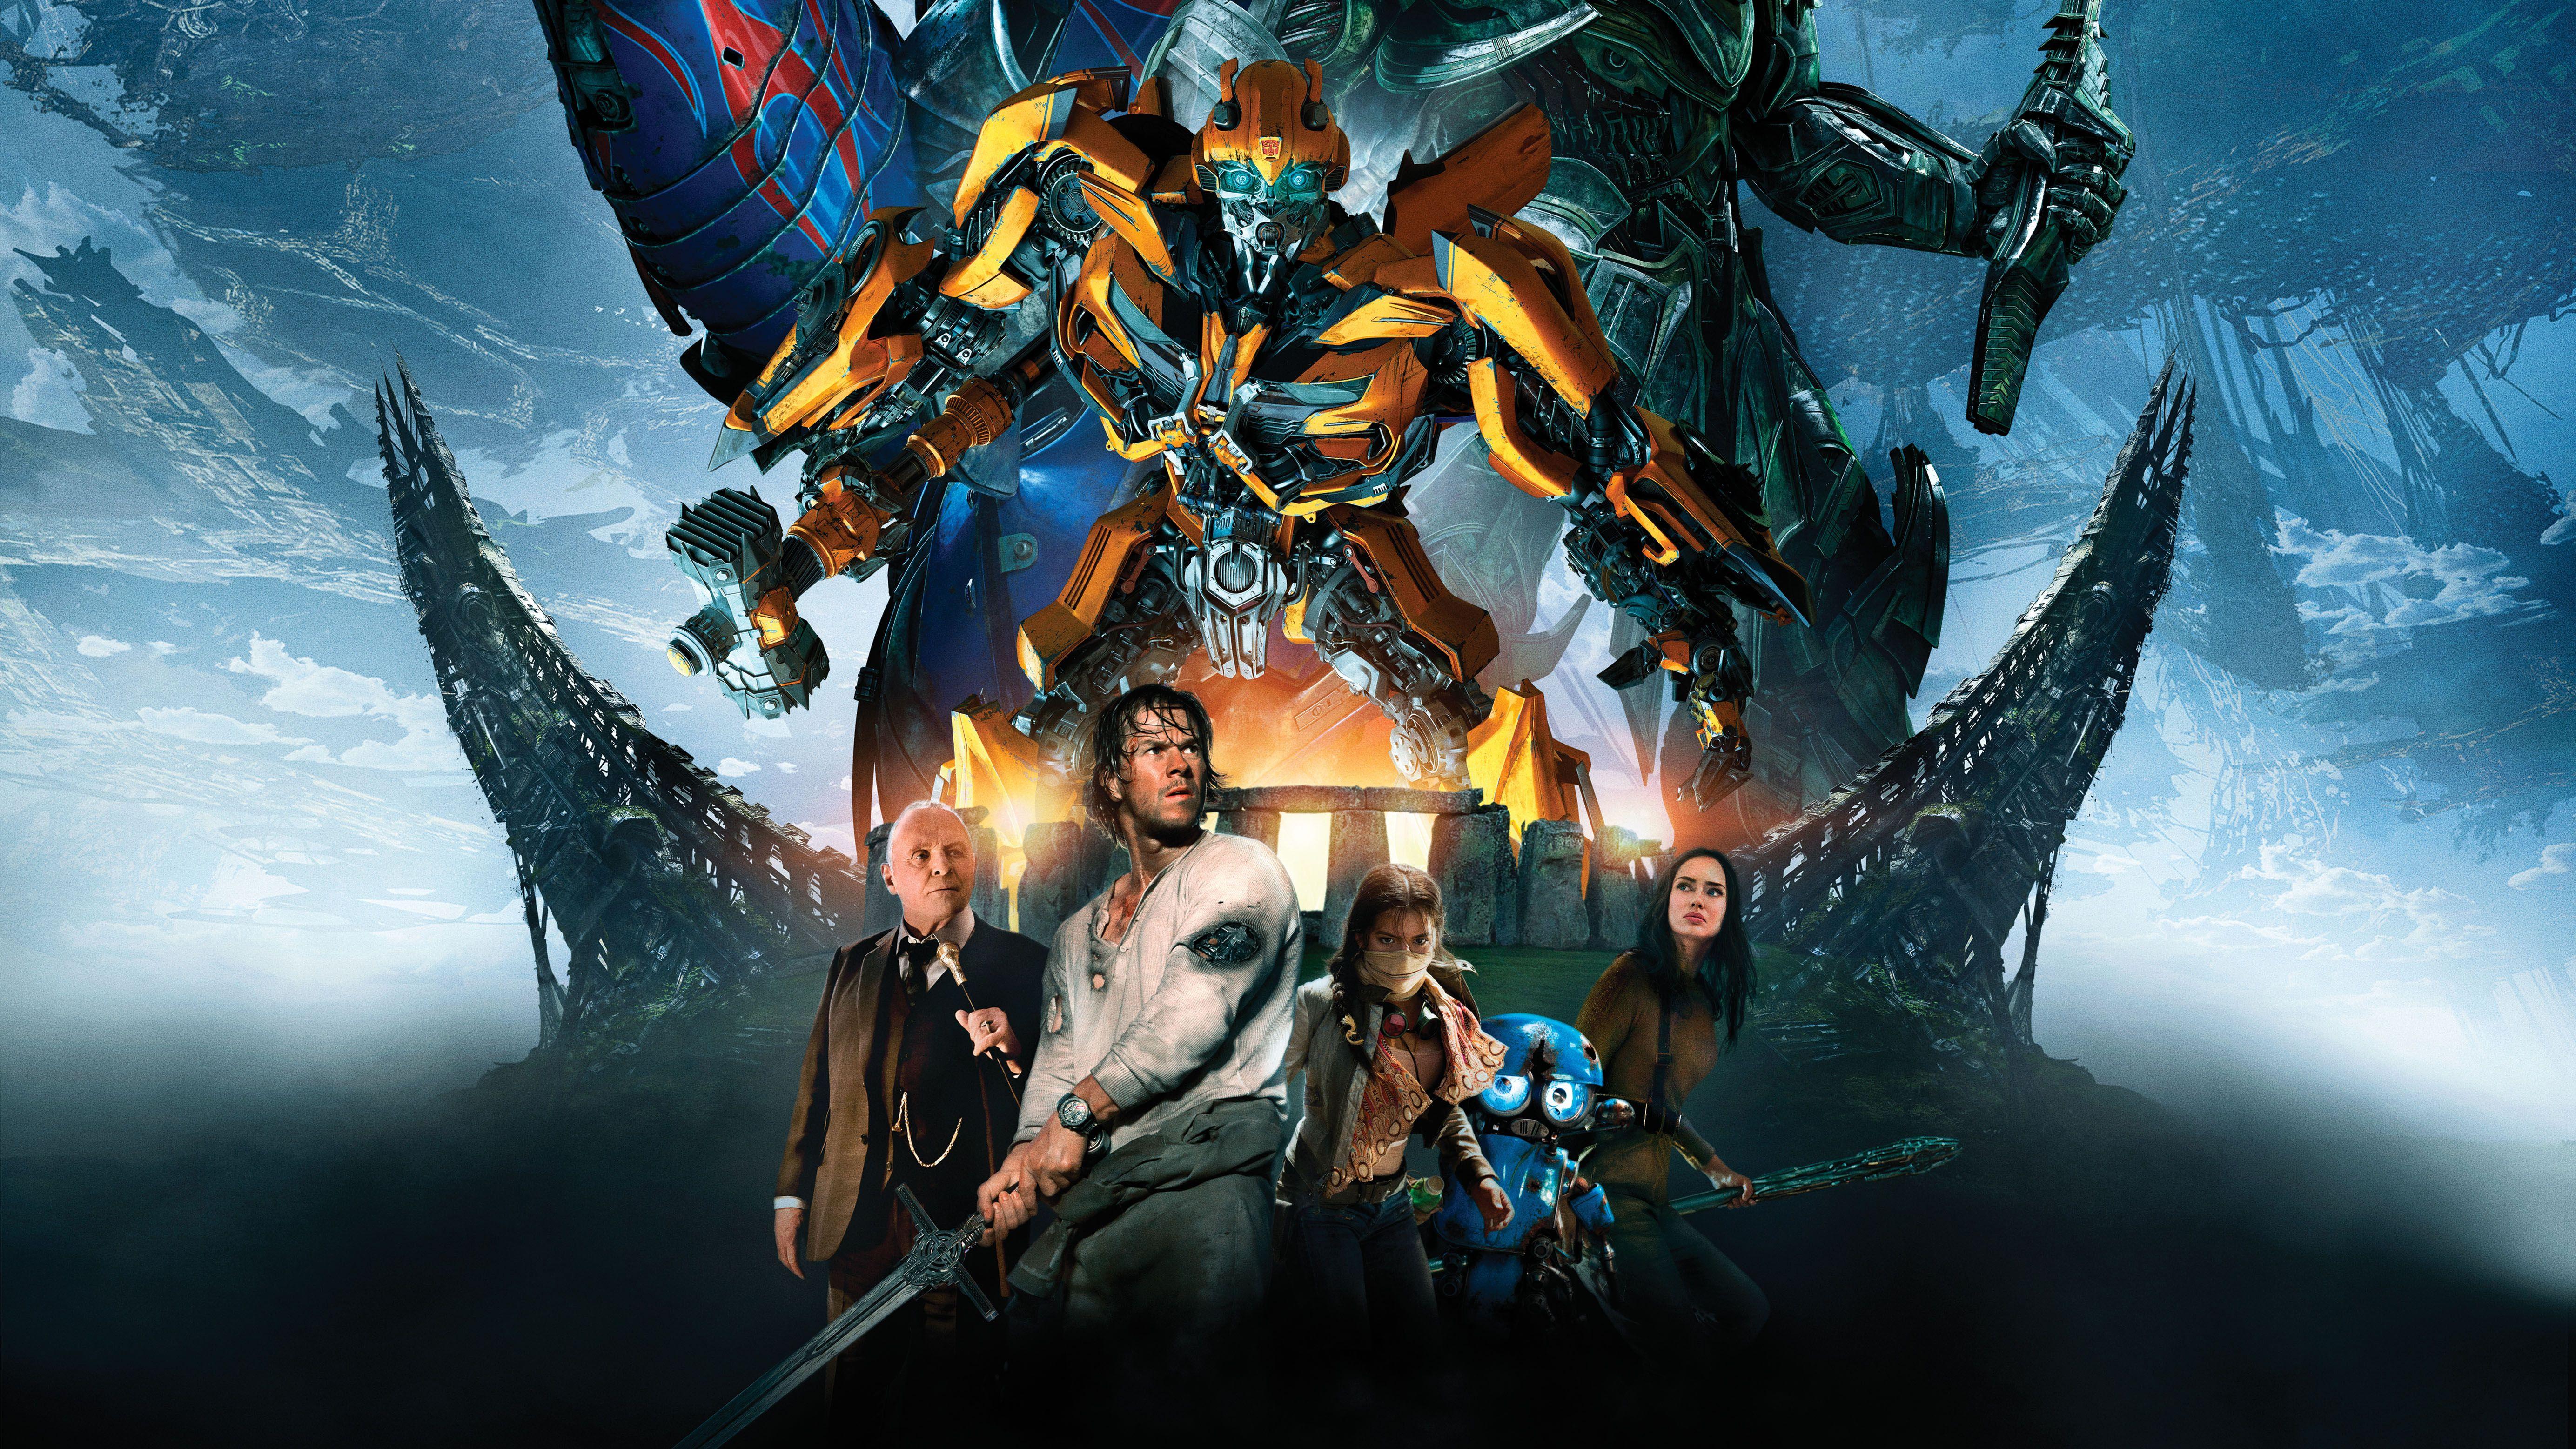 Wallpaper Transformers: The Last Knight, Bumblebee, Mark Wahlberg